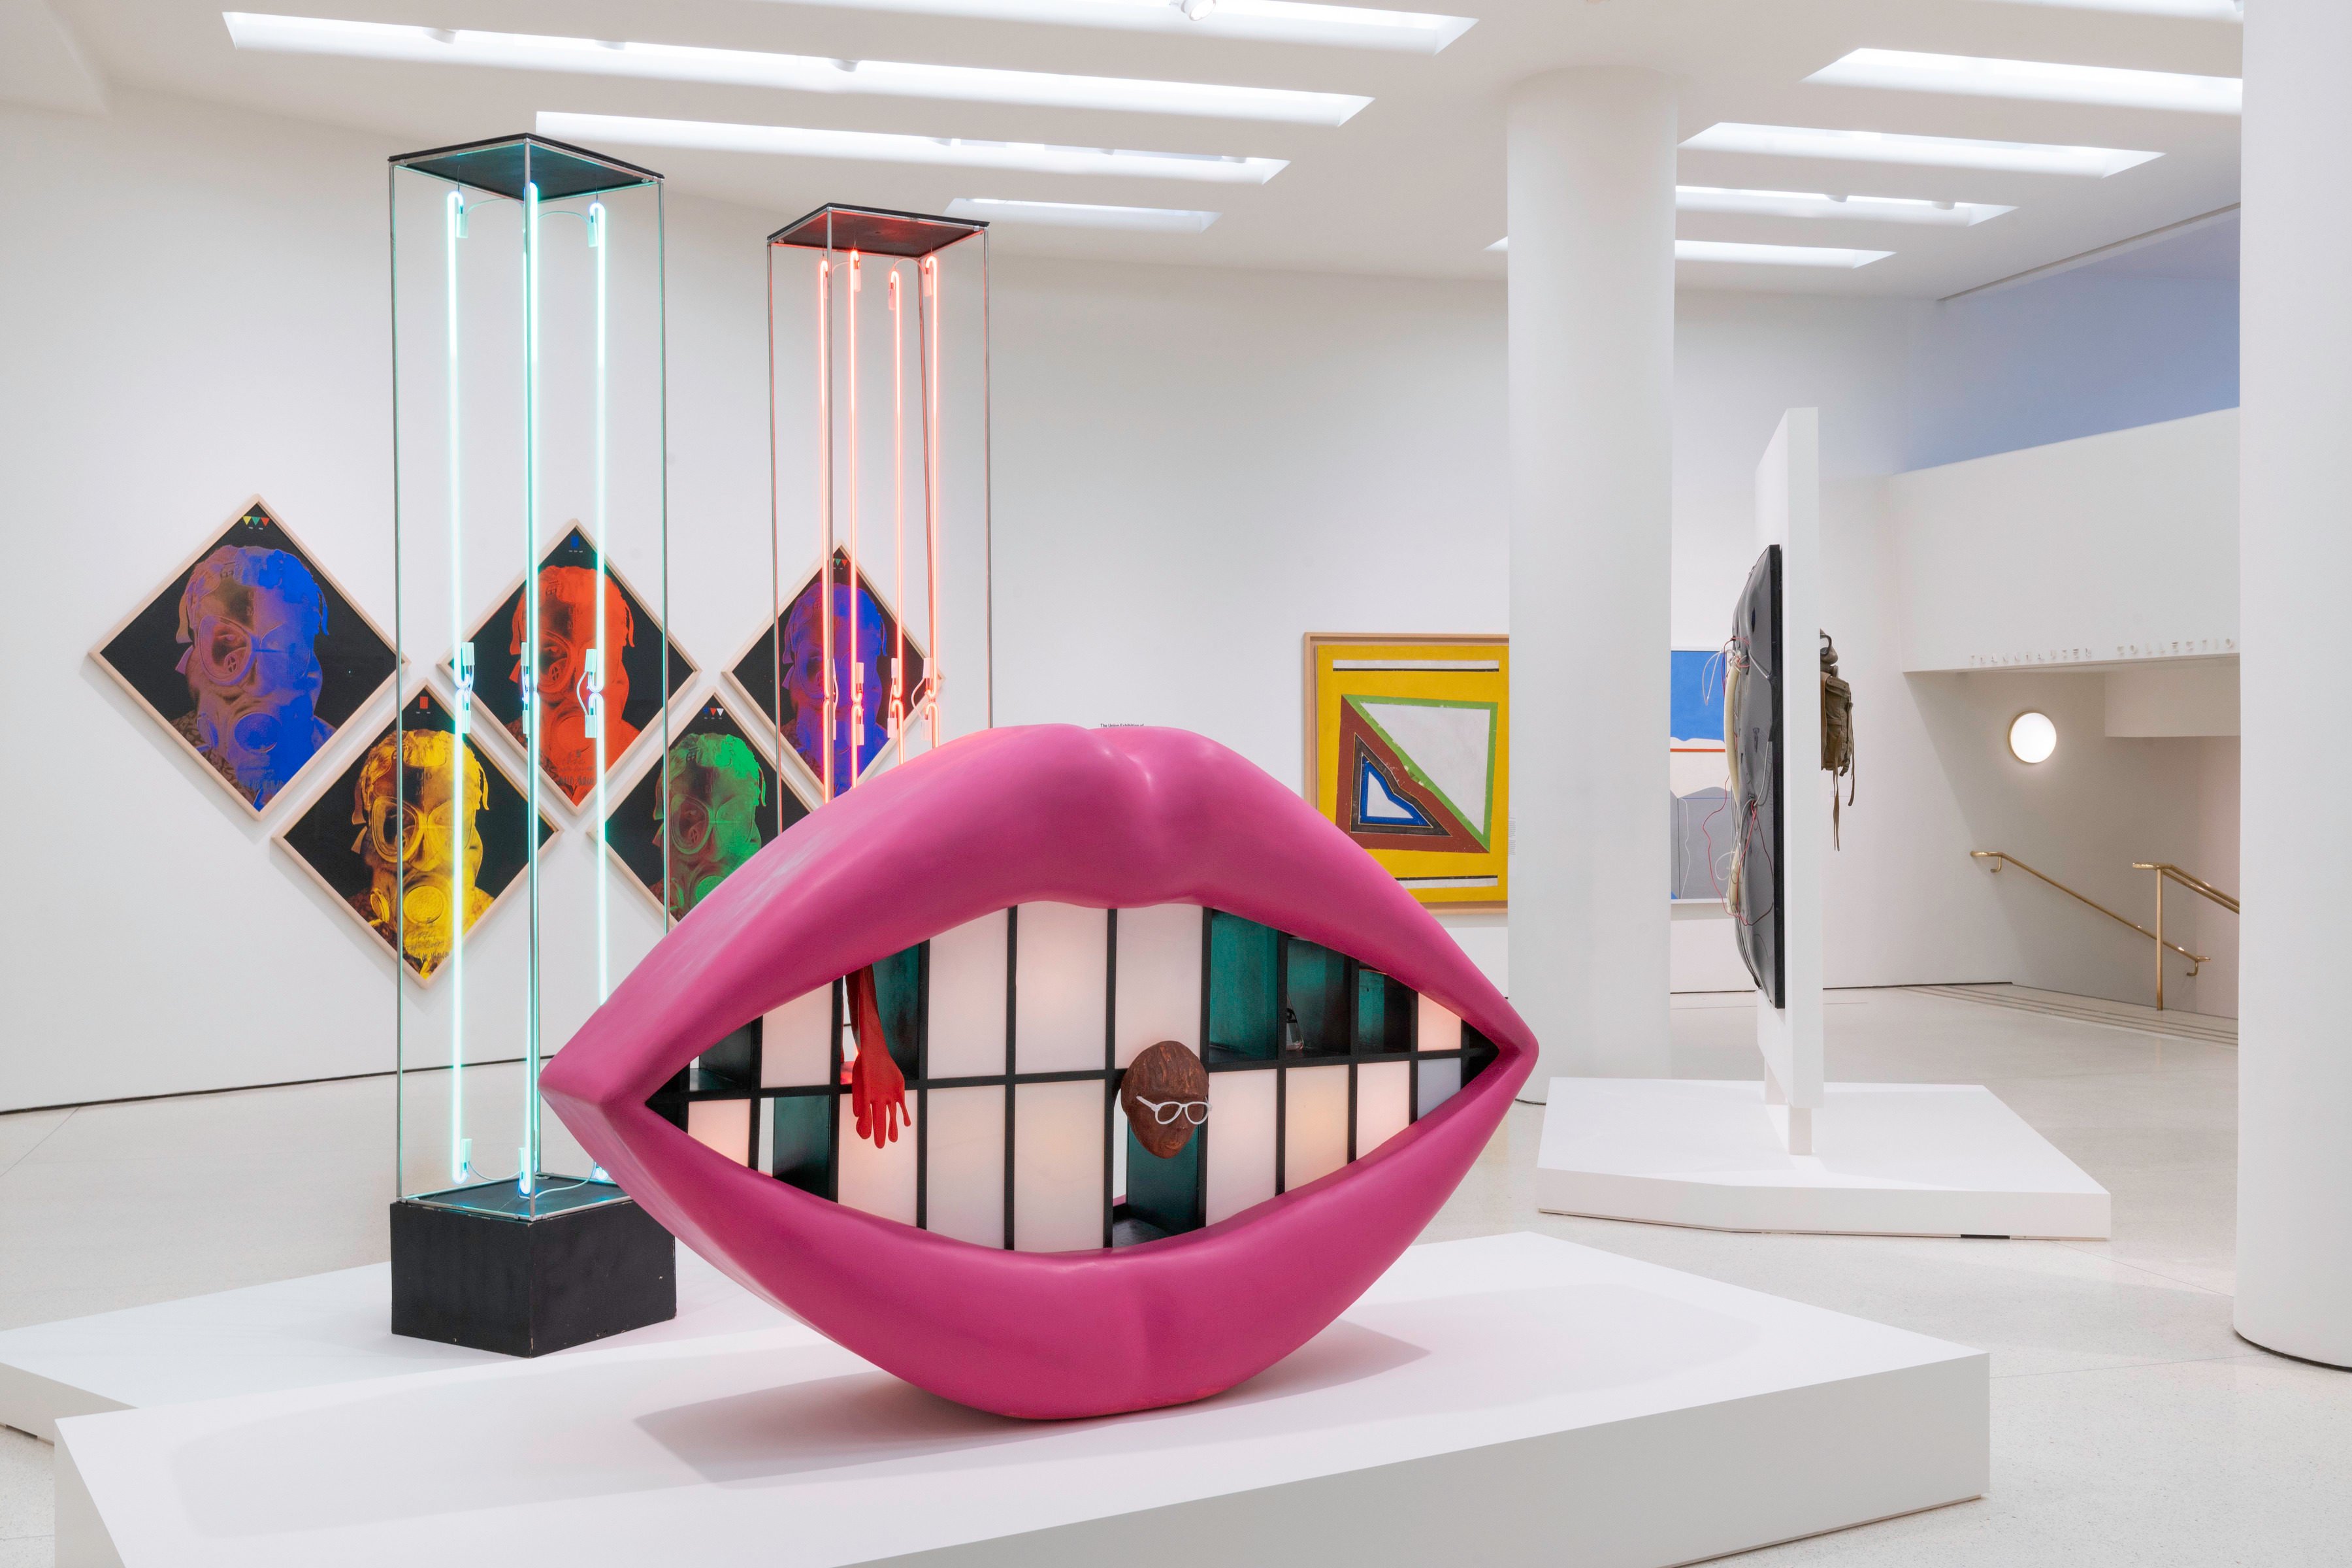 Installation view of “Only the Young: Experimental Art in Korea, 1960s-1970s”, of 20th-century South Korean art, with Jung Kang-ja’s “Kiss Me” in the foreground, at the Solomon R. Guggenheim Museum in New York. Photo: Guggenheim